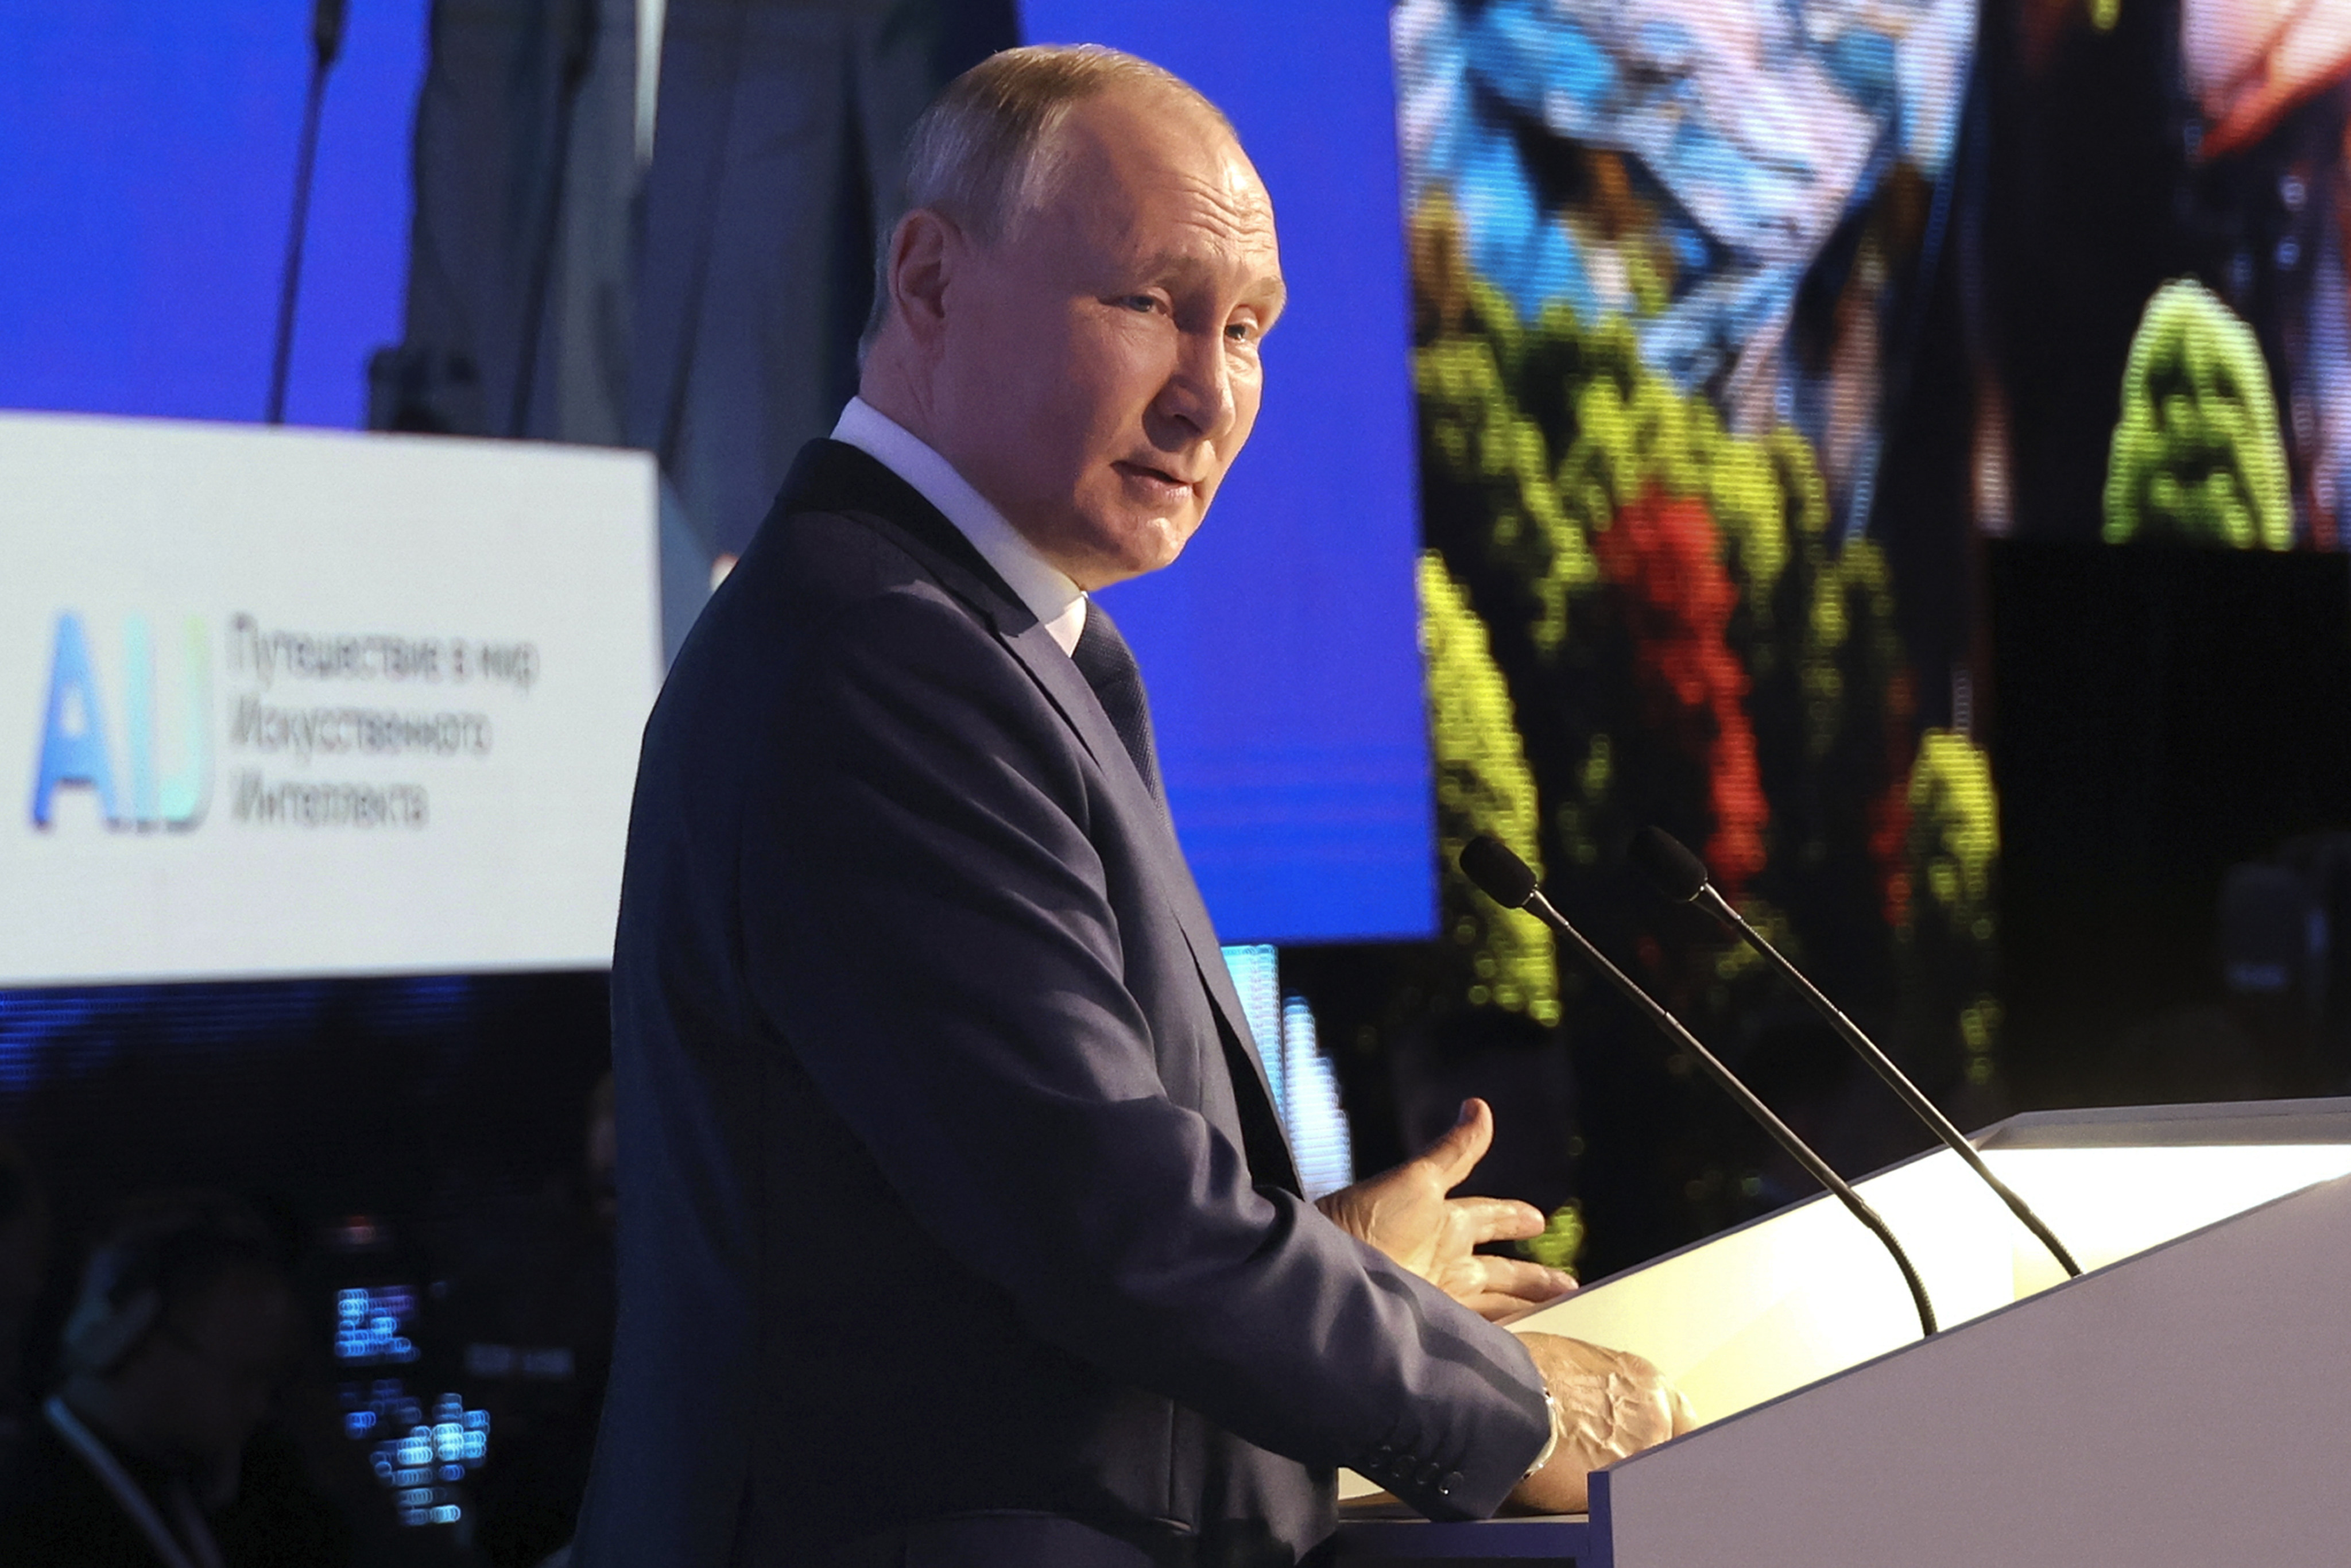 Russian President Vladimir Putin speaks as he visits an artificial intelligence conference in Moscow on Friday. Photo: Sputnik via AP